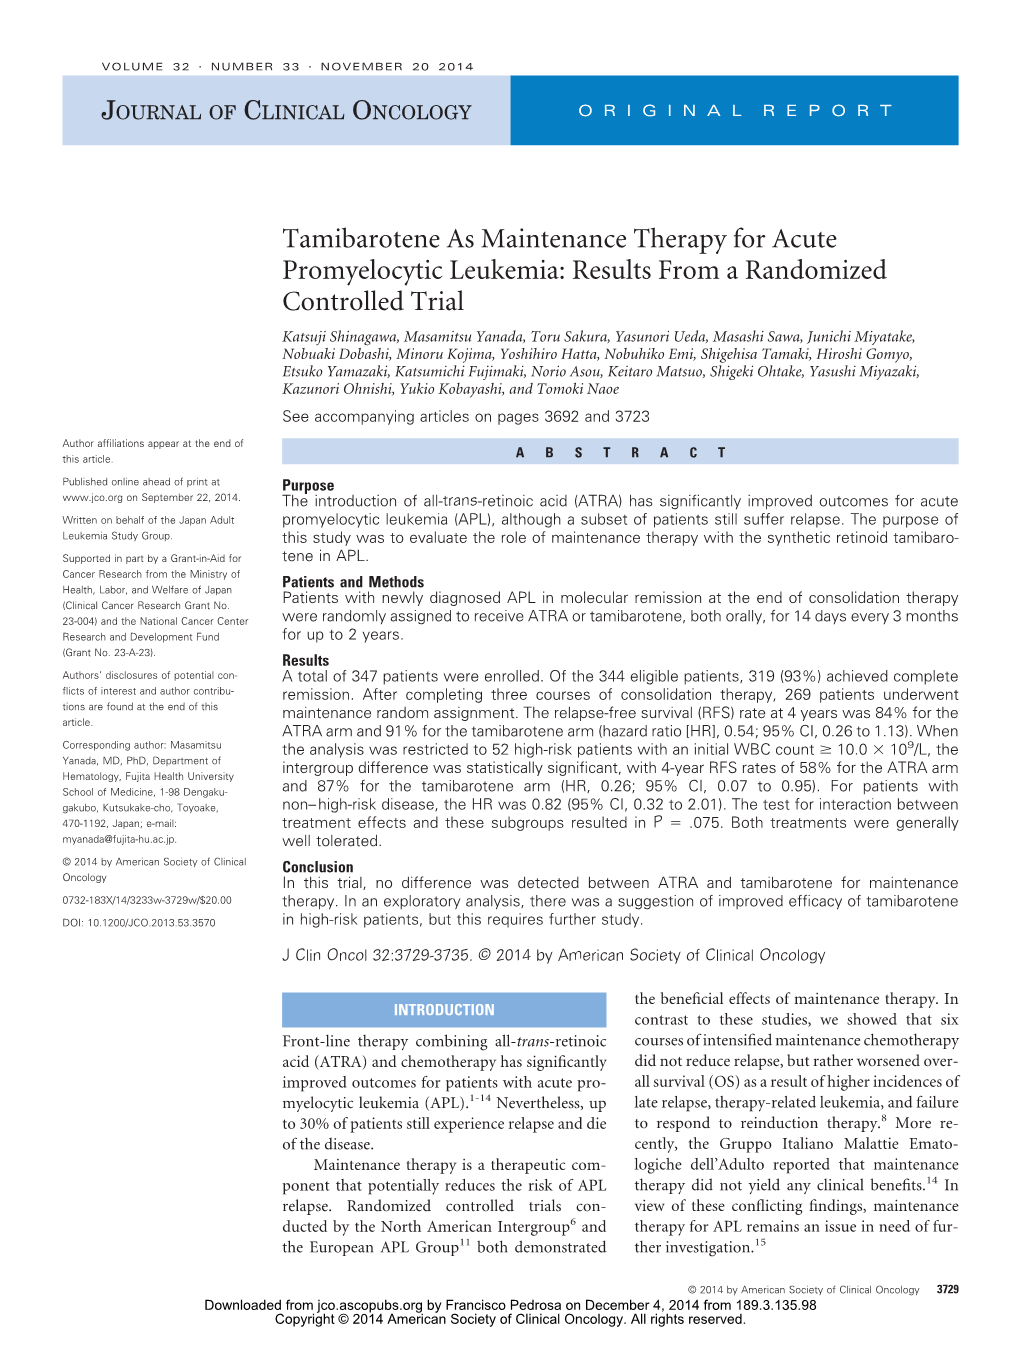 Tamibarotene As Maintenance Therapy for Acute